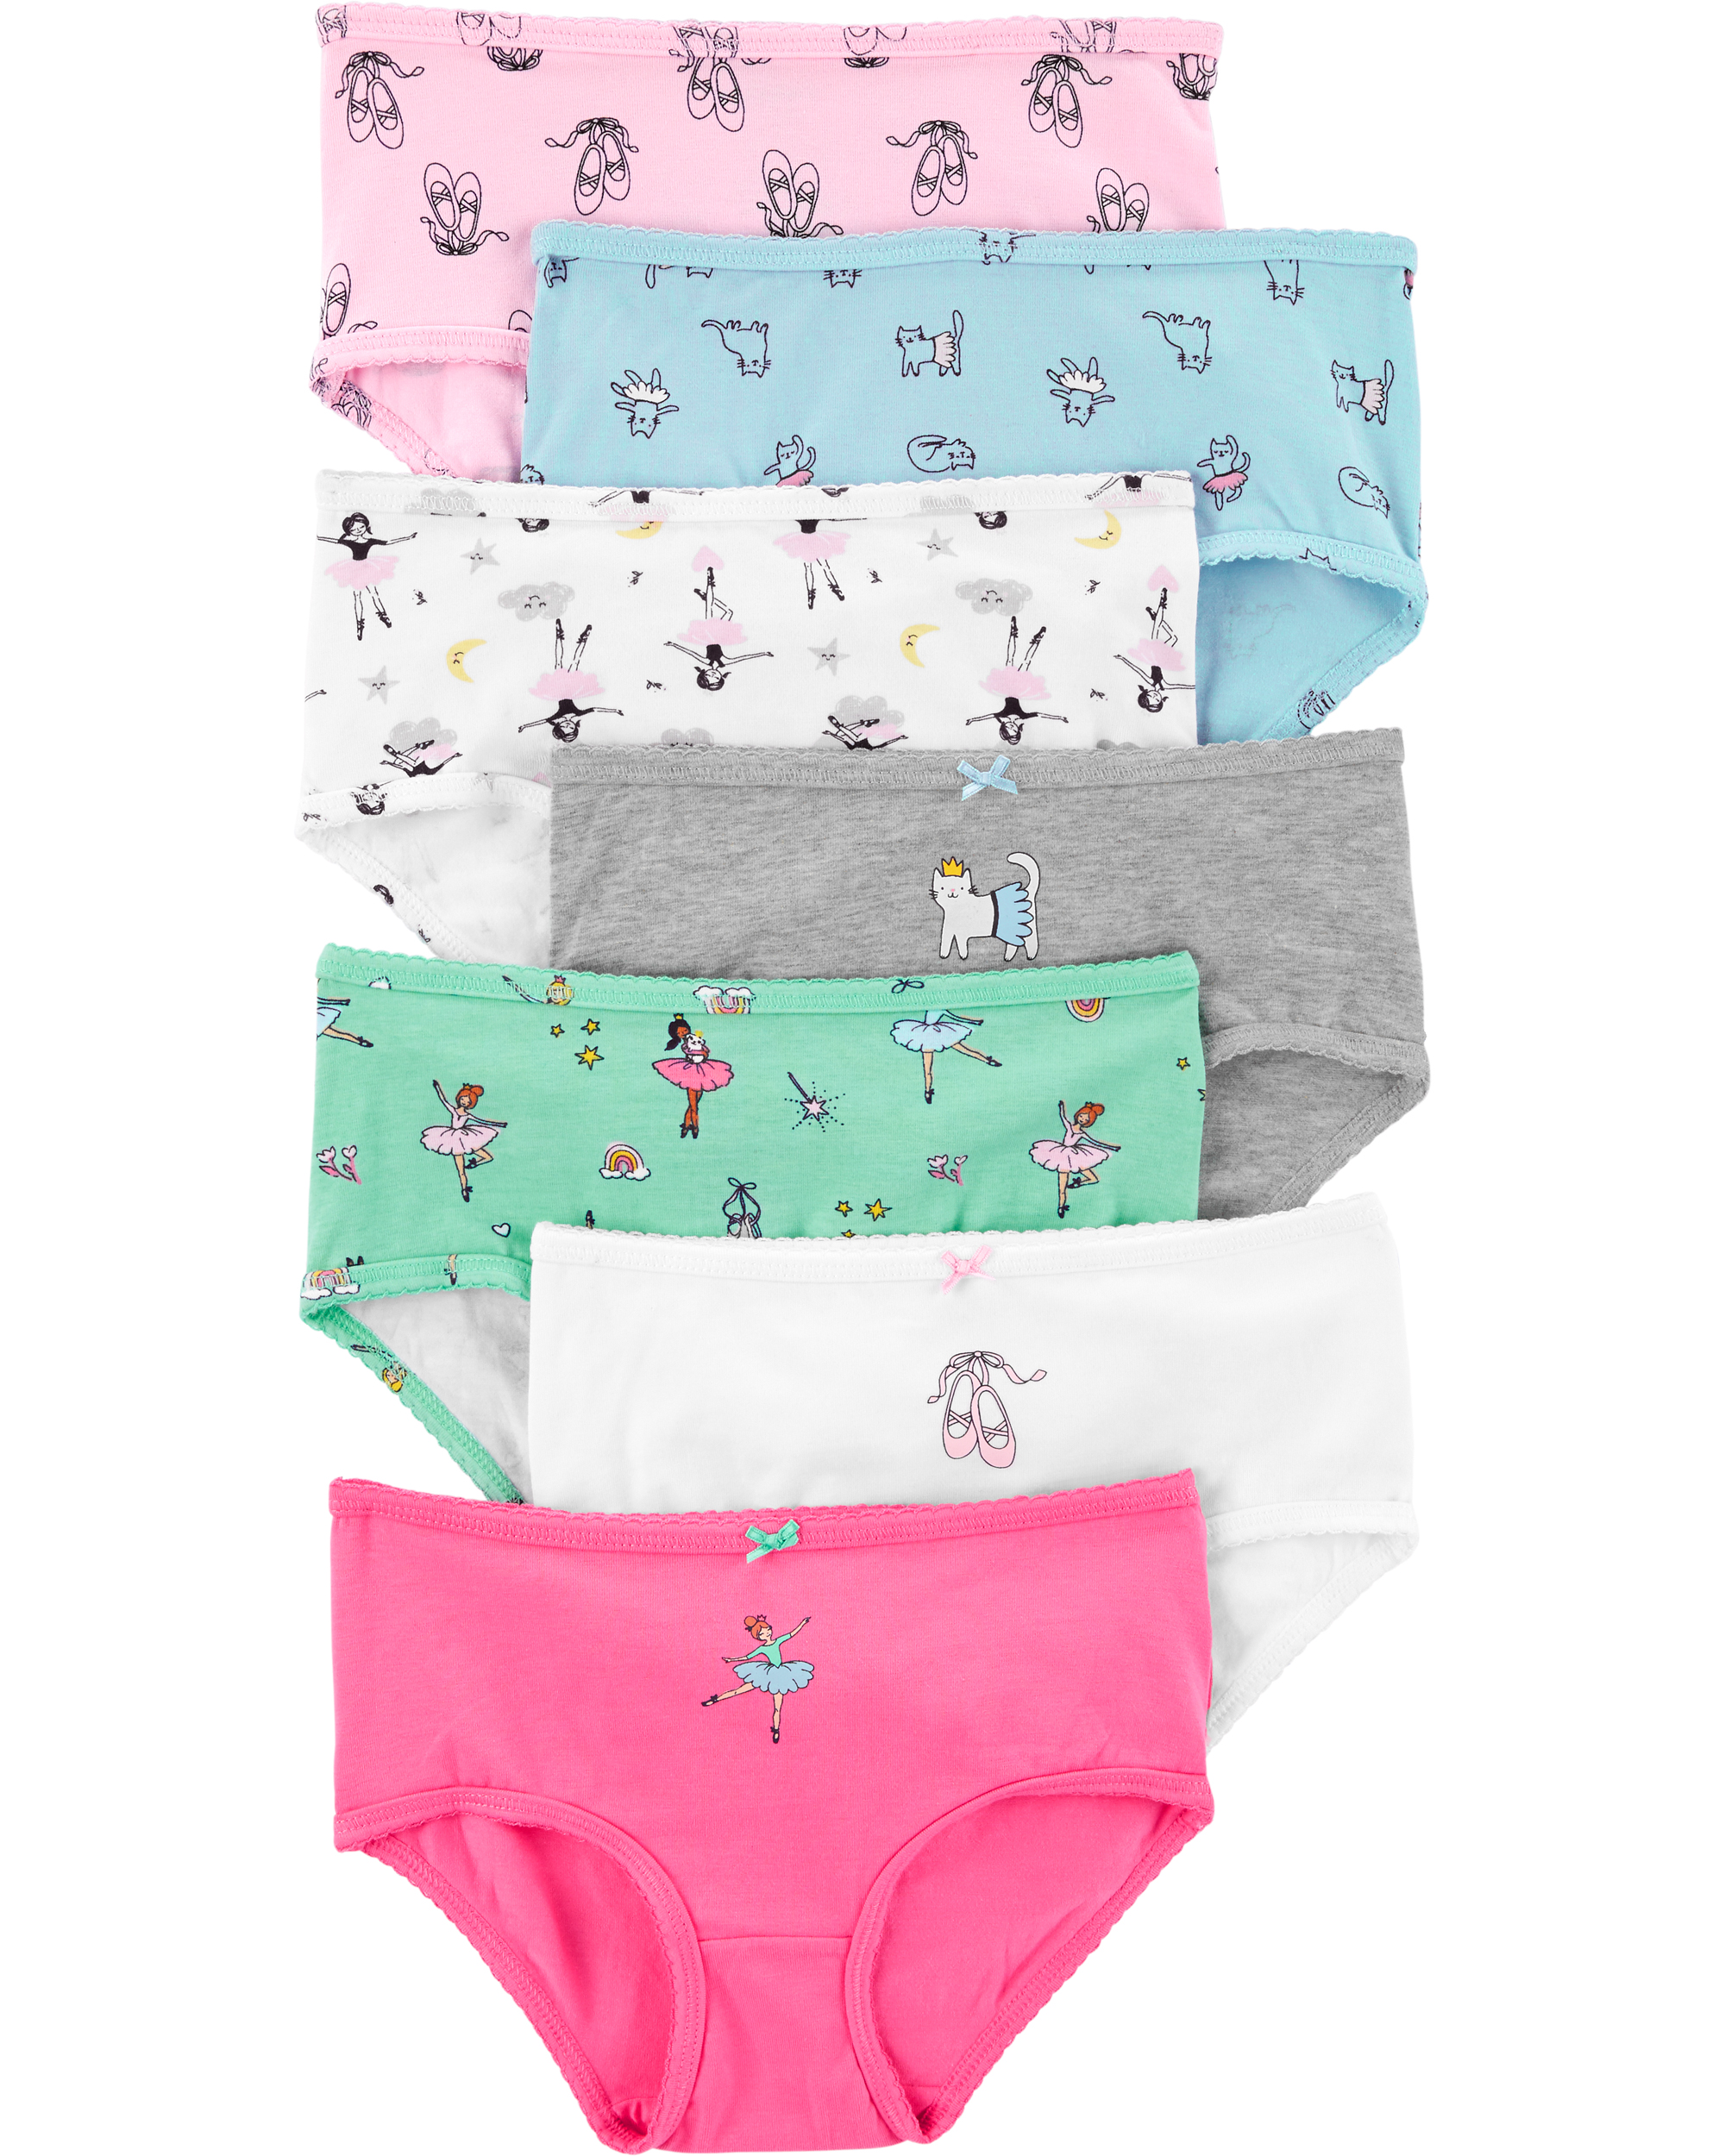 3 pcs/lot 100% Cotton Girls Underwear Soft Breathable Kids Underpants  Floral Cute Kid's Clothes Girls Briefs 24 Colors Panties (Color : MX008,  Kid Size : 8 9 Years) : Buy Online at